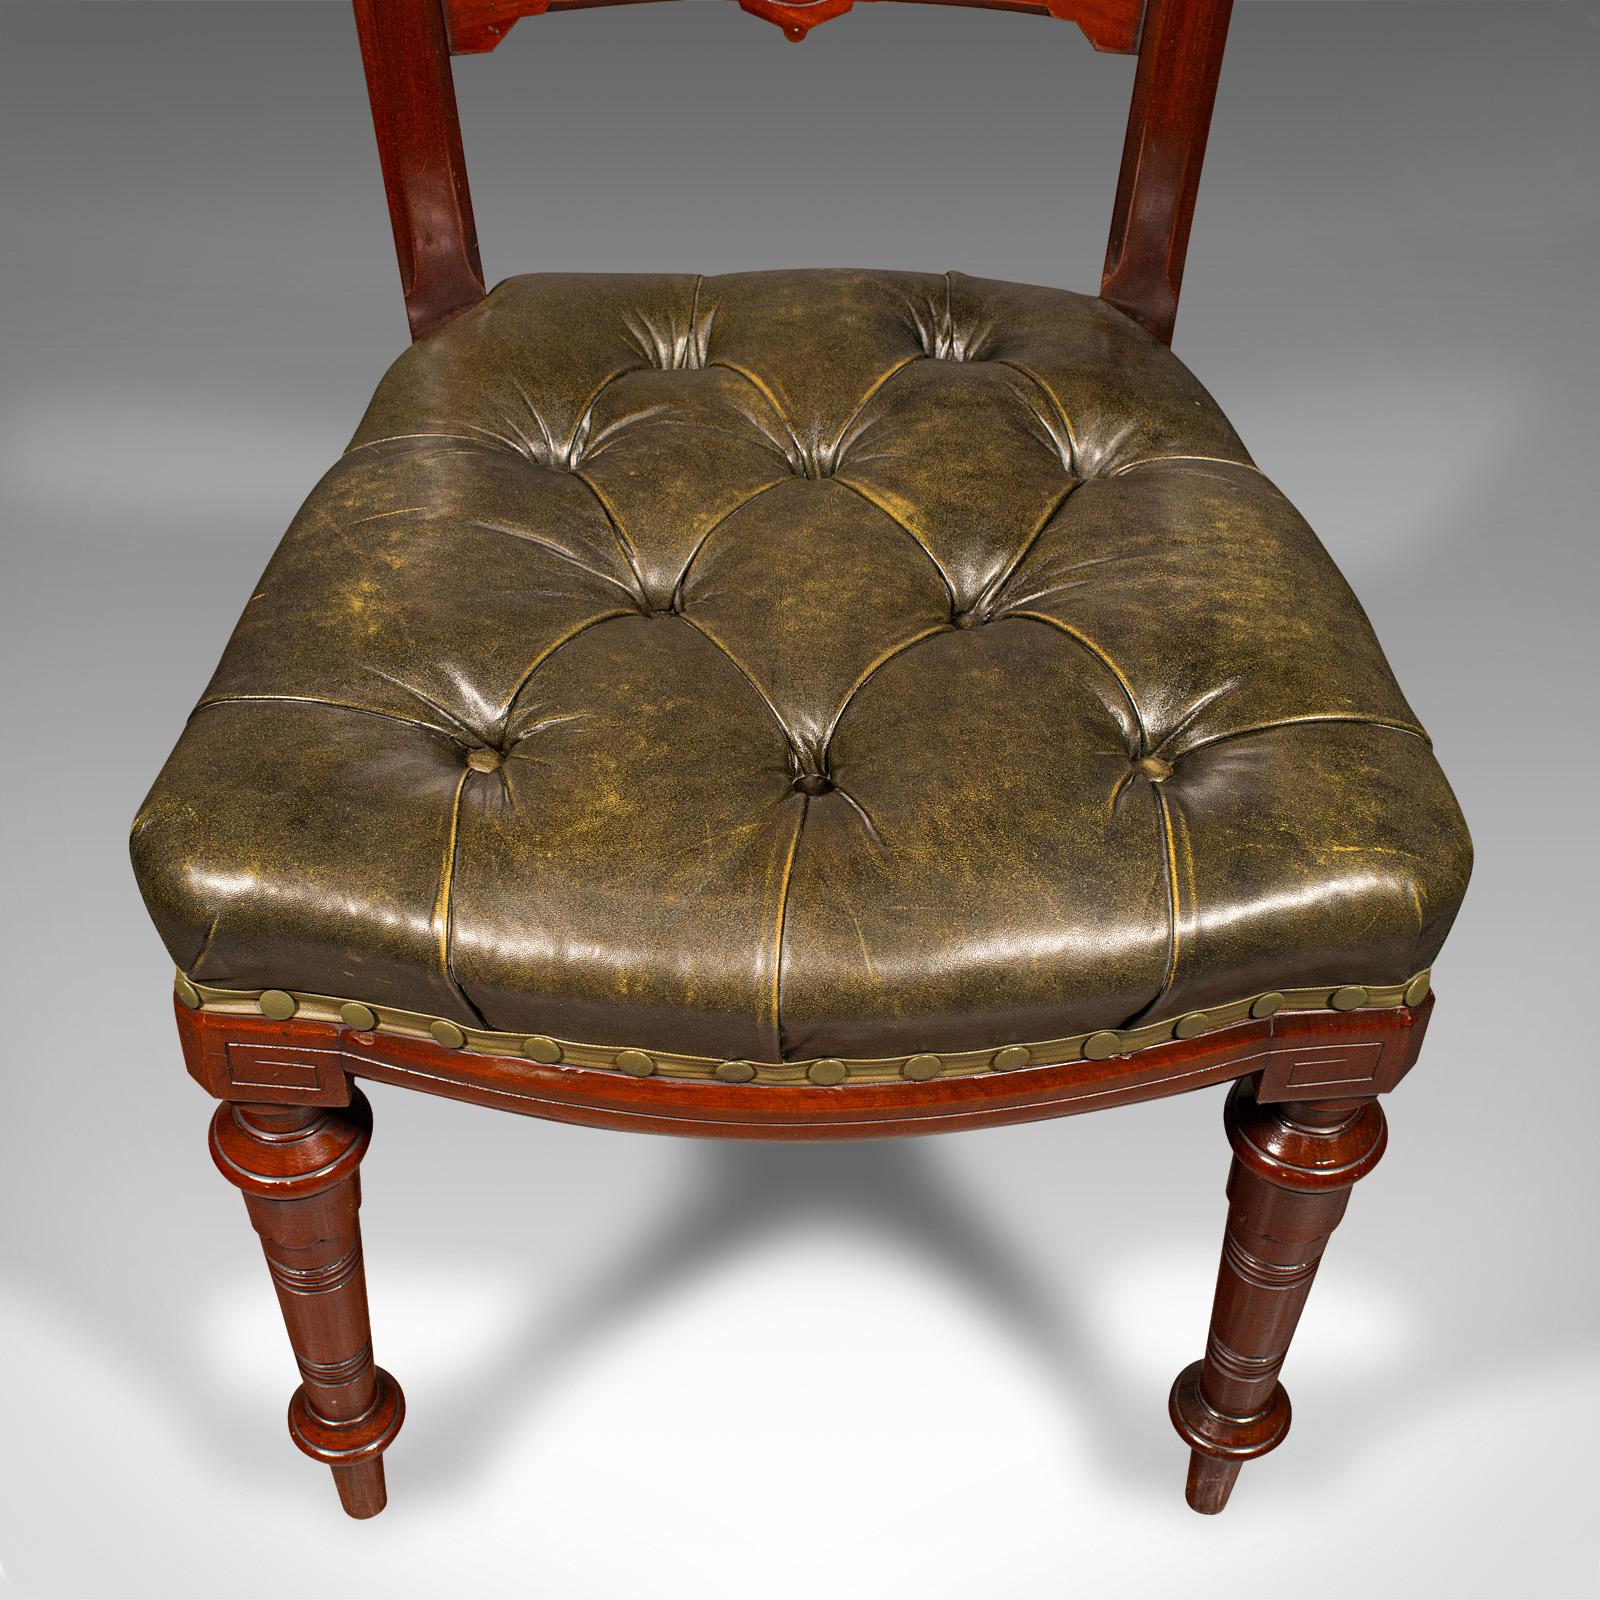 Set of 8 Antique Dining Chairs, English, Walnut, Leather, Victorian, Circa 1870 For Sale 2